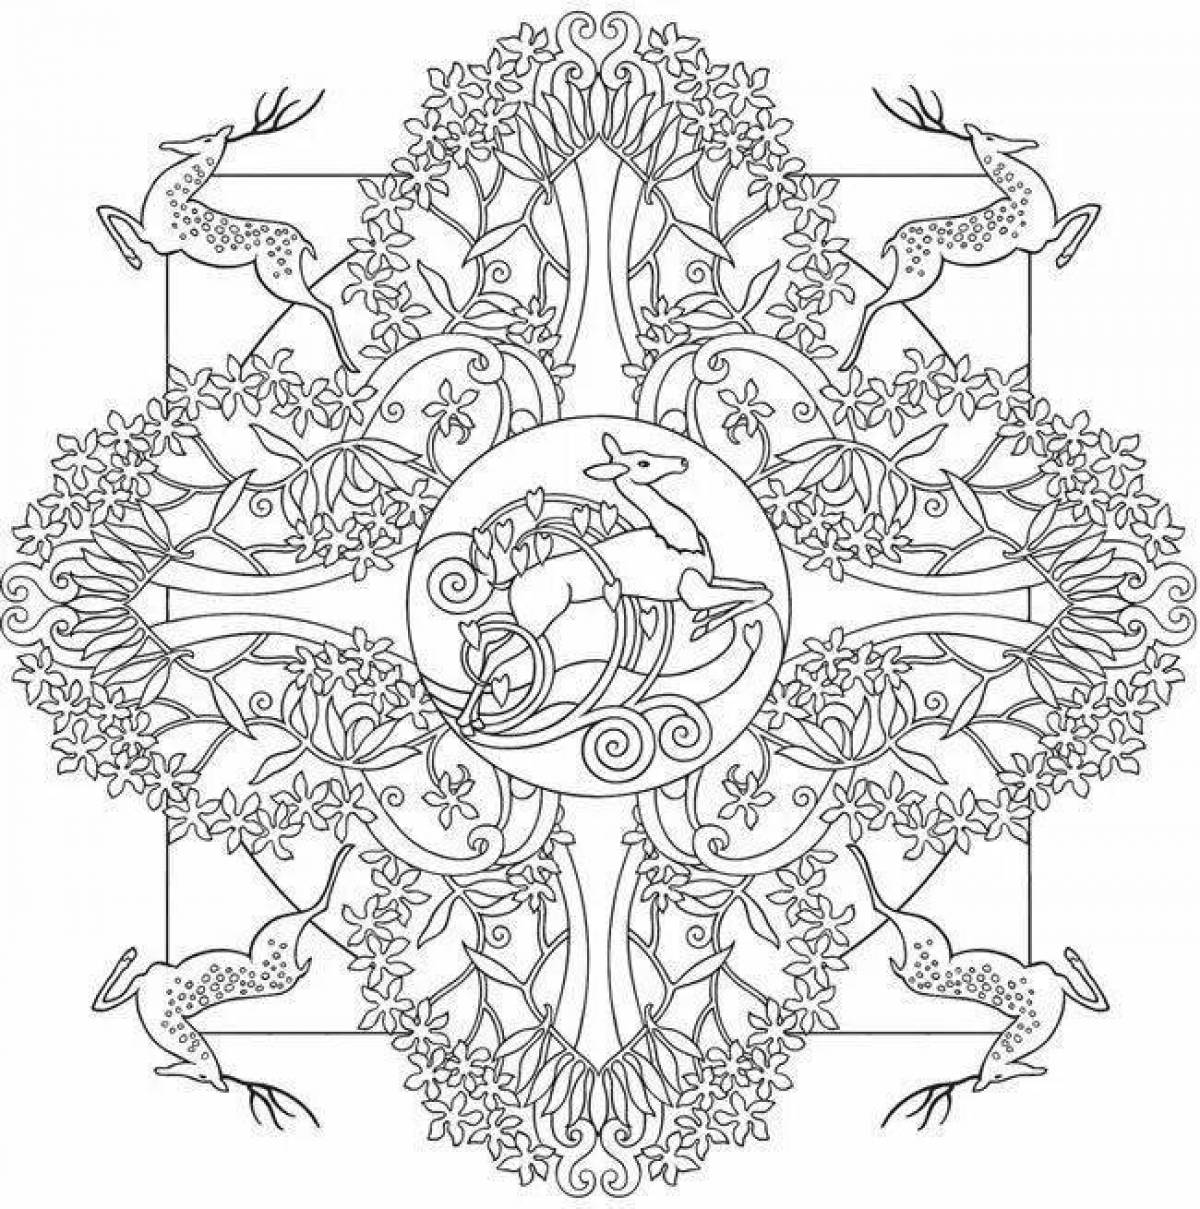 Entertaining coloring book with meaning